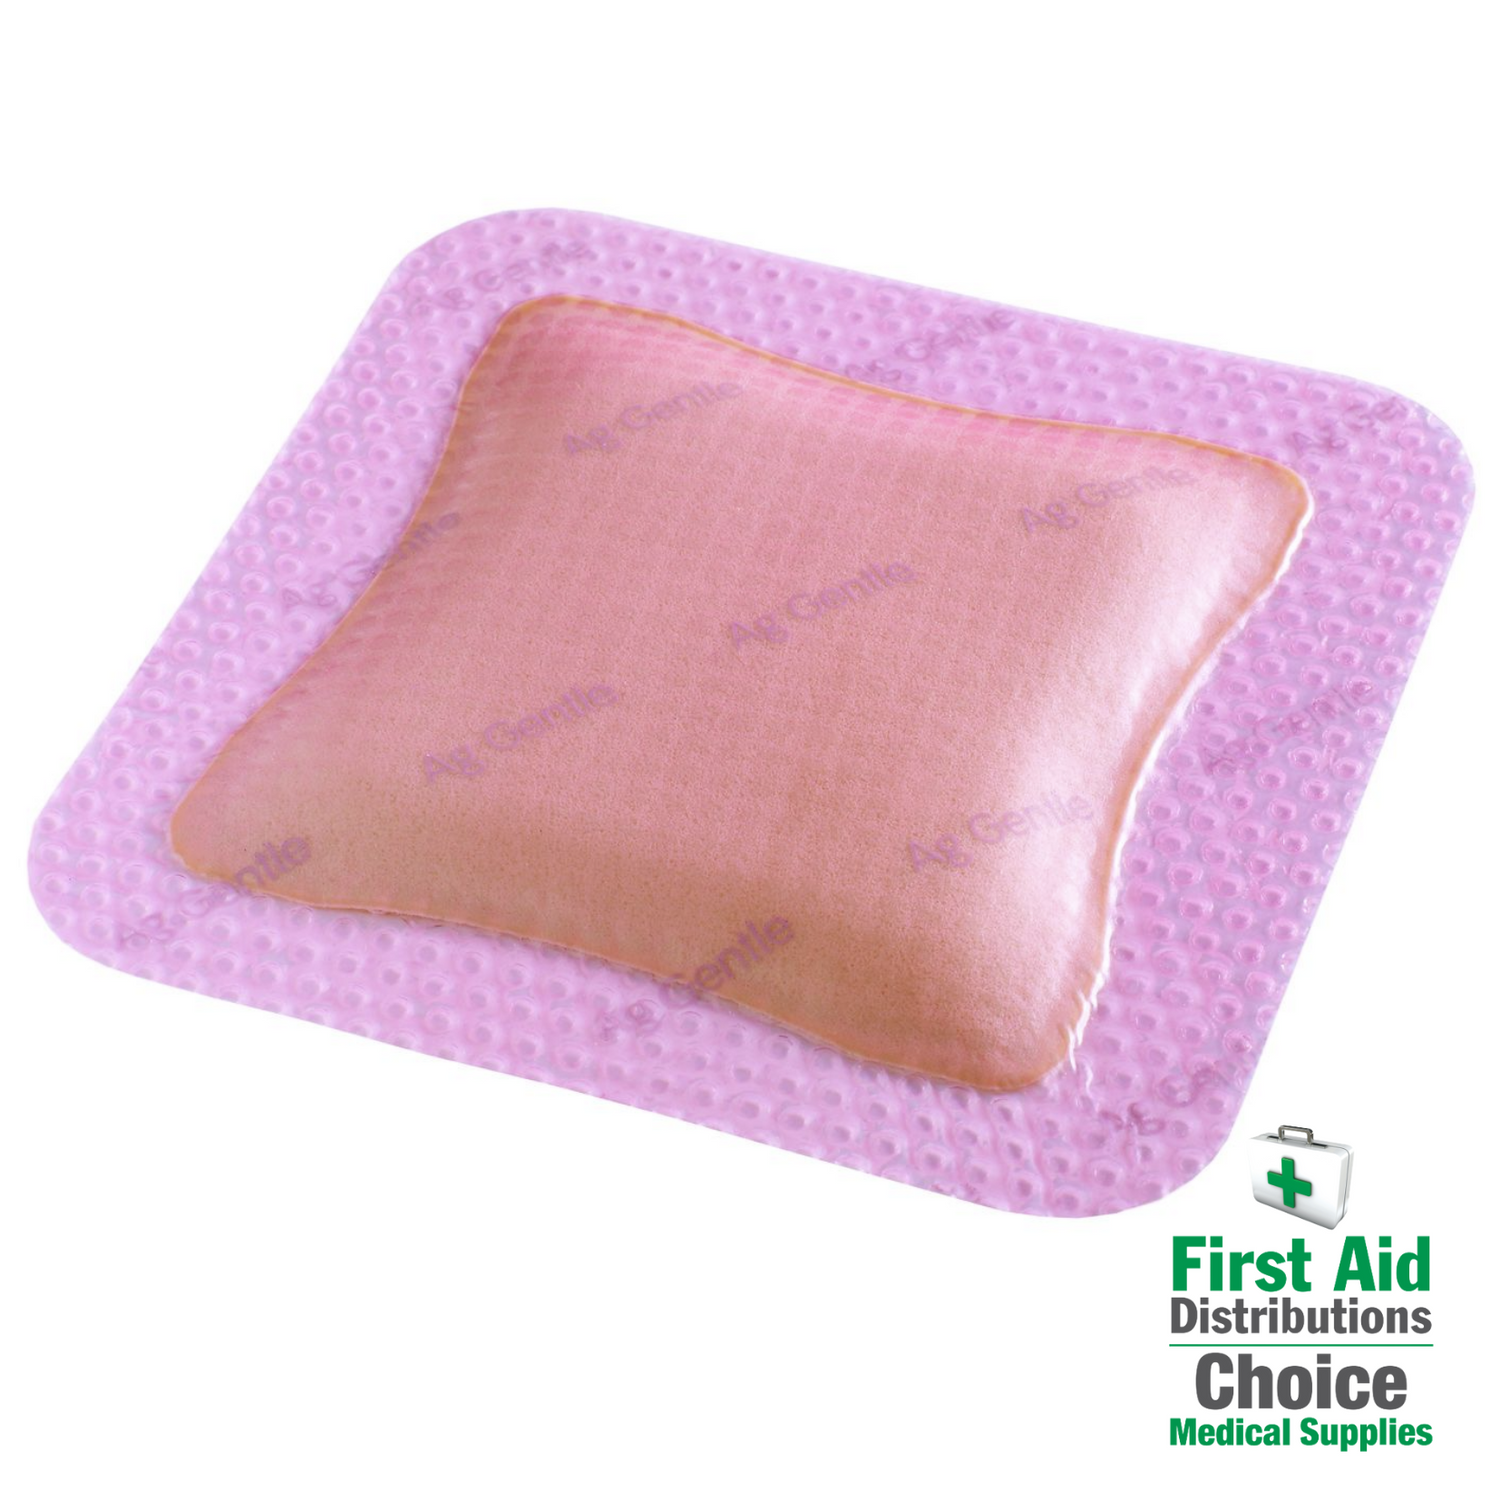 Antimicrobial dressings (Silver)